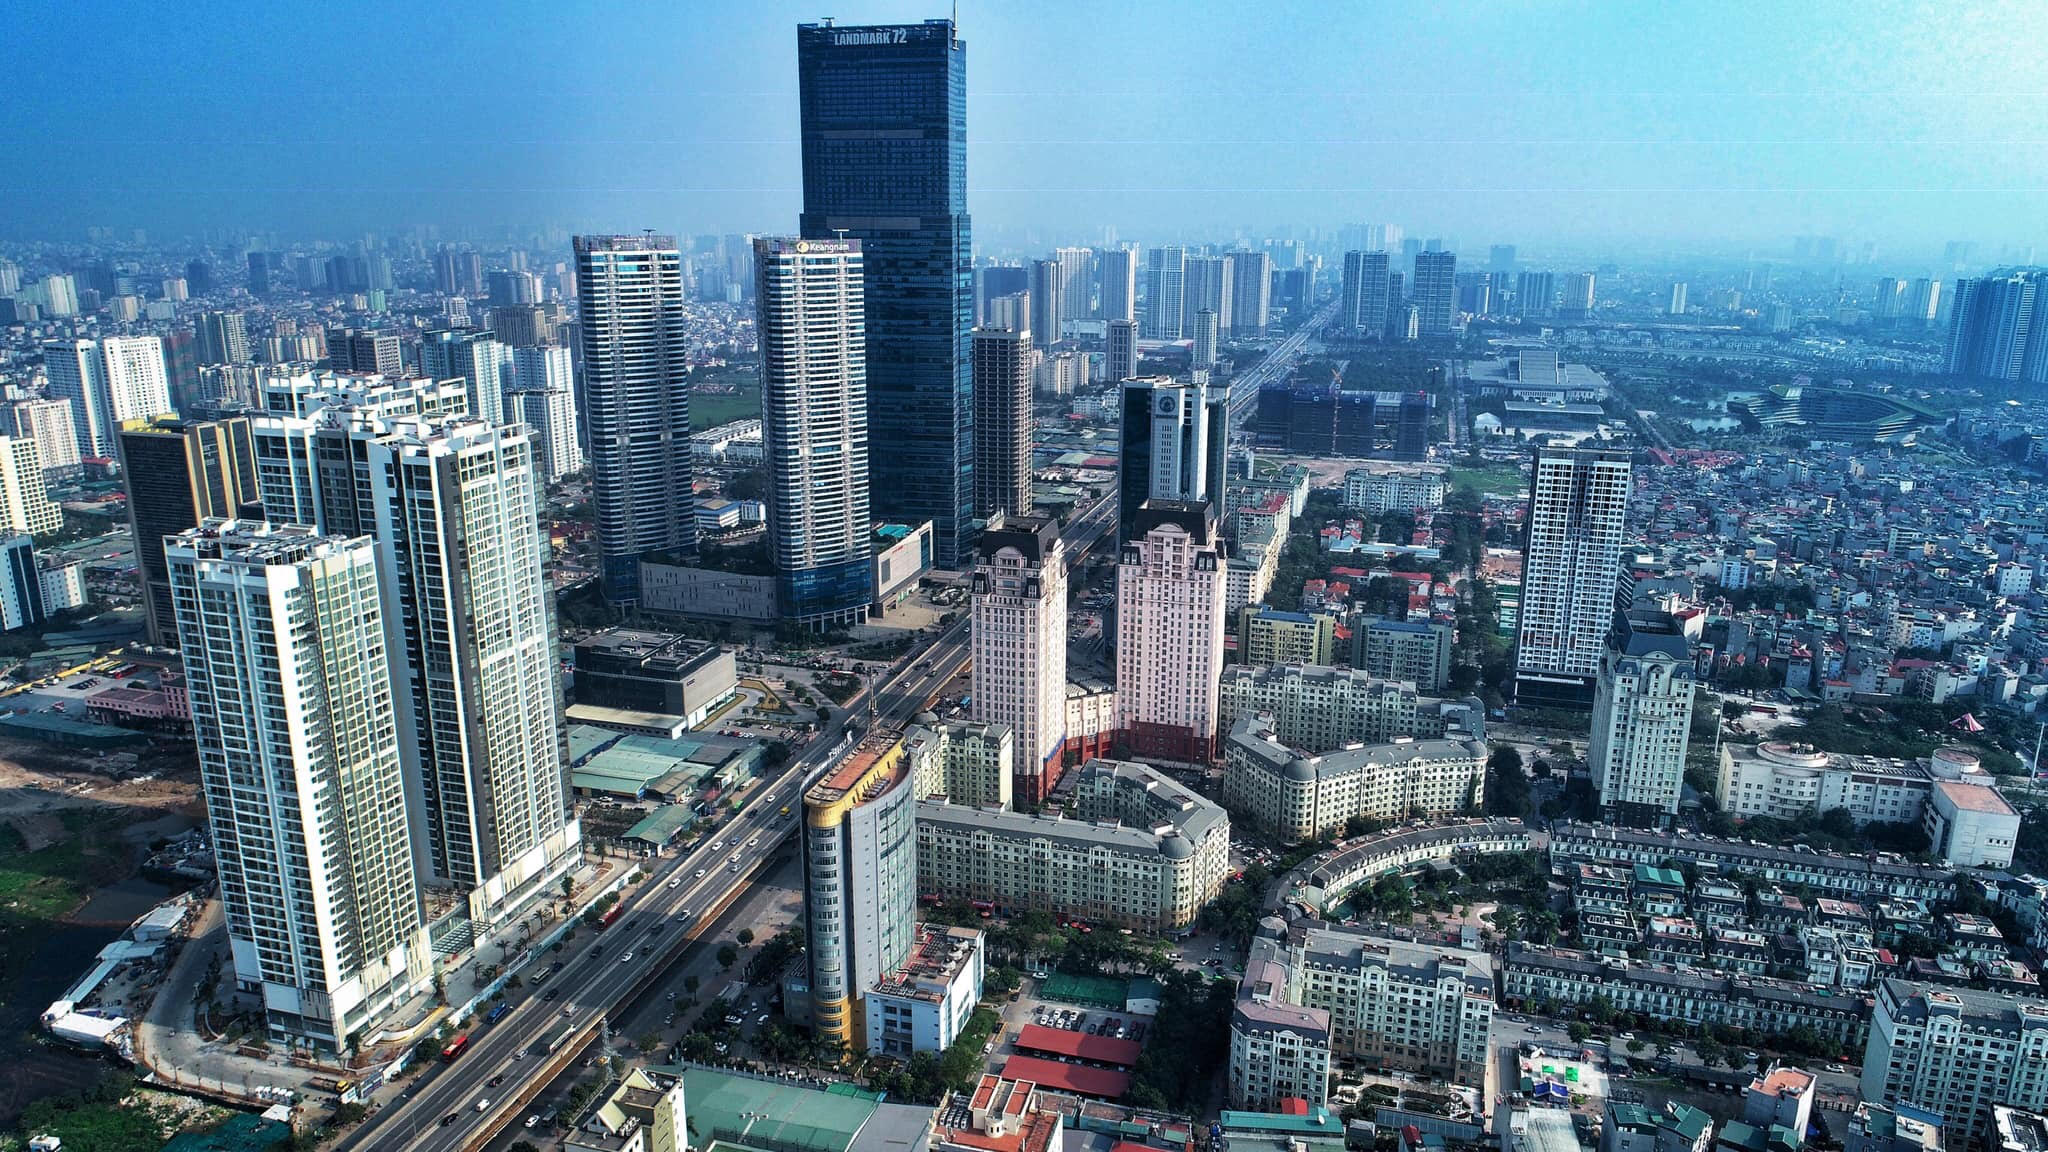 How can I get accurate information for houses and apartments renting in Hanoi?